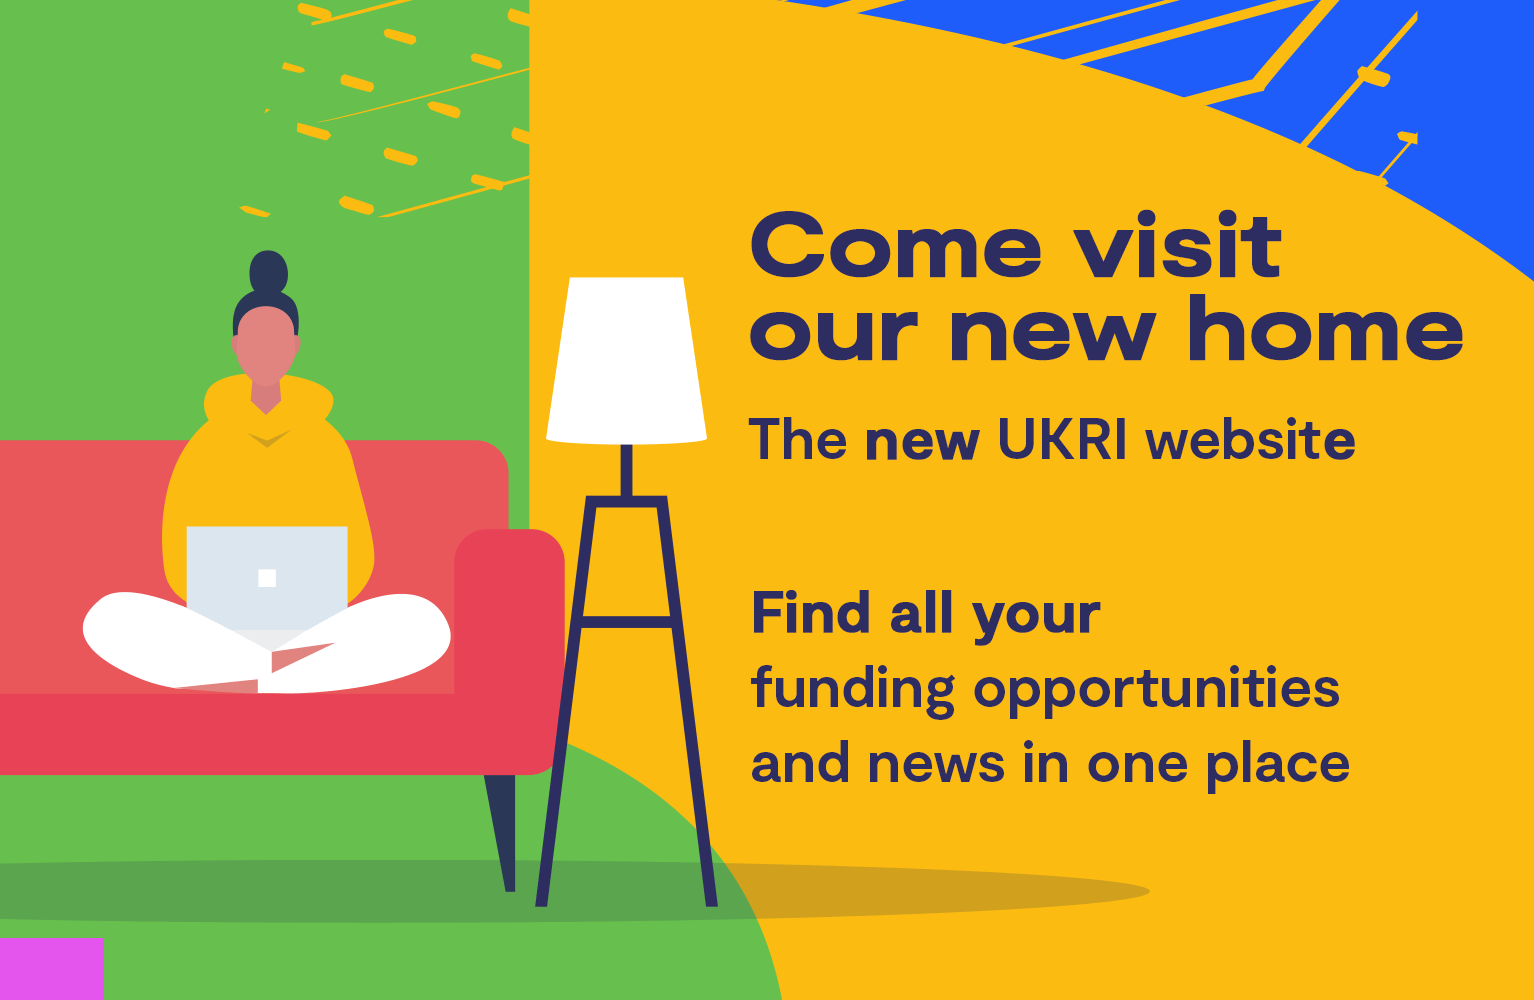 Come visit our new home. The new UKRI website. Find all your funding opportunities and news in one place.